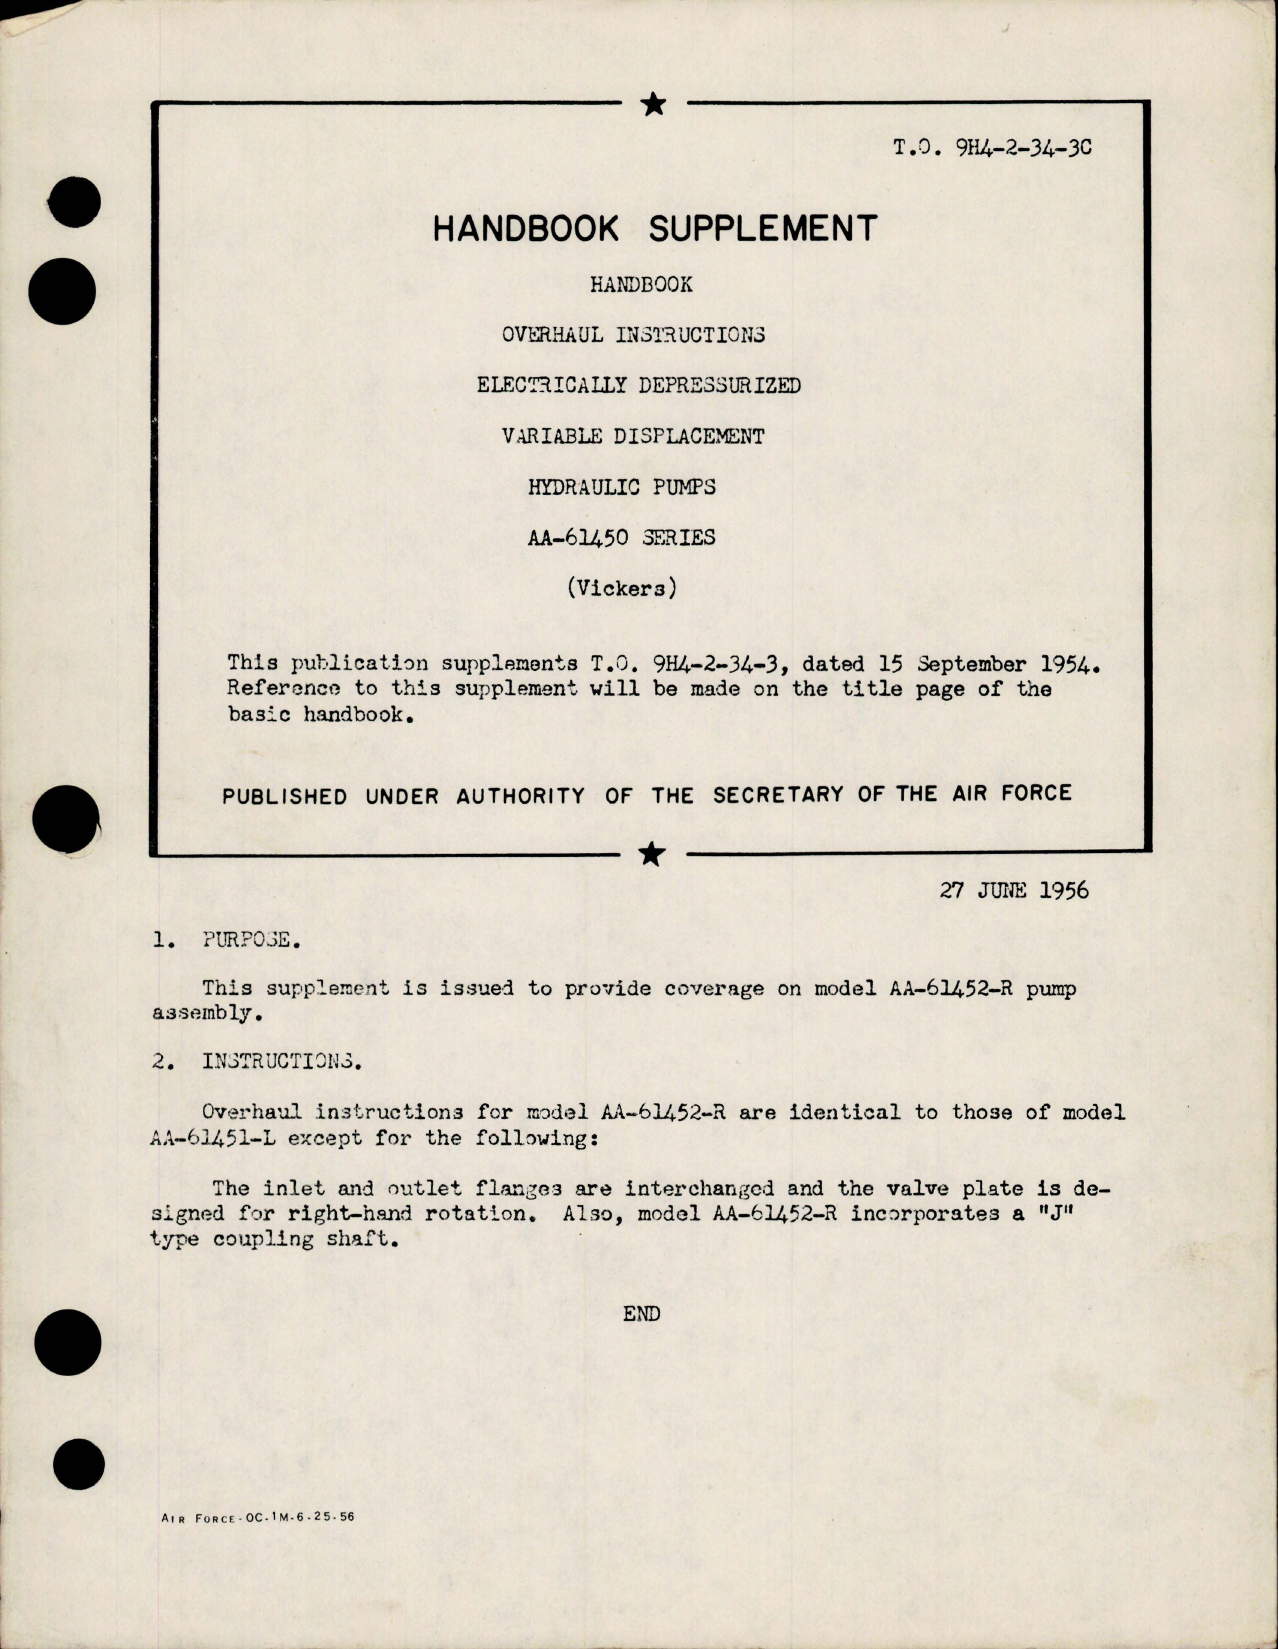 Sample page 1 from AirCorps Library document: Supplement to Overhaul Instructions for Electrically Depressurized Variable Displacement Hydraulic Pumps - AA-61450 Series 